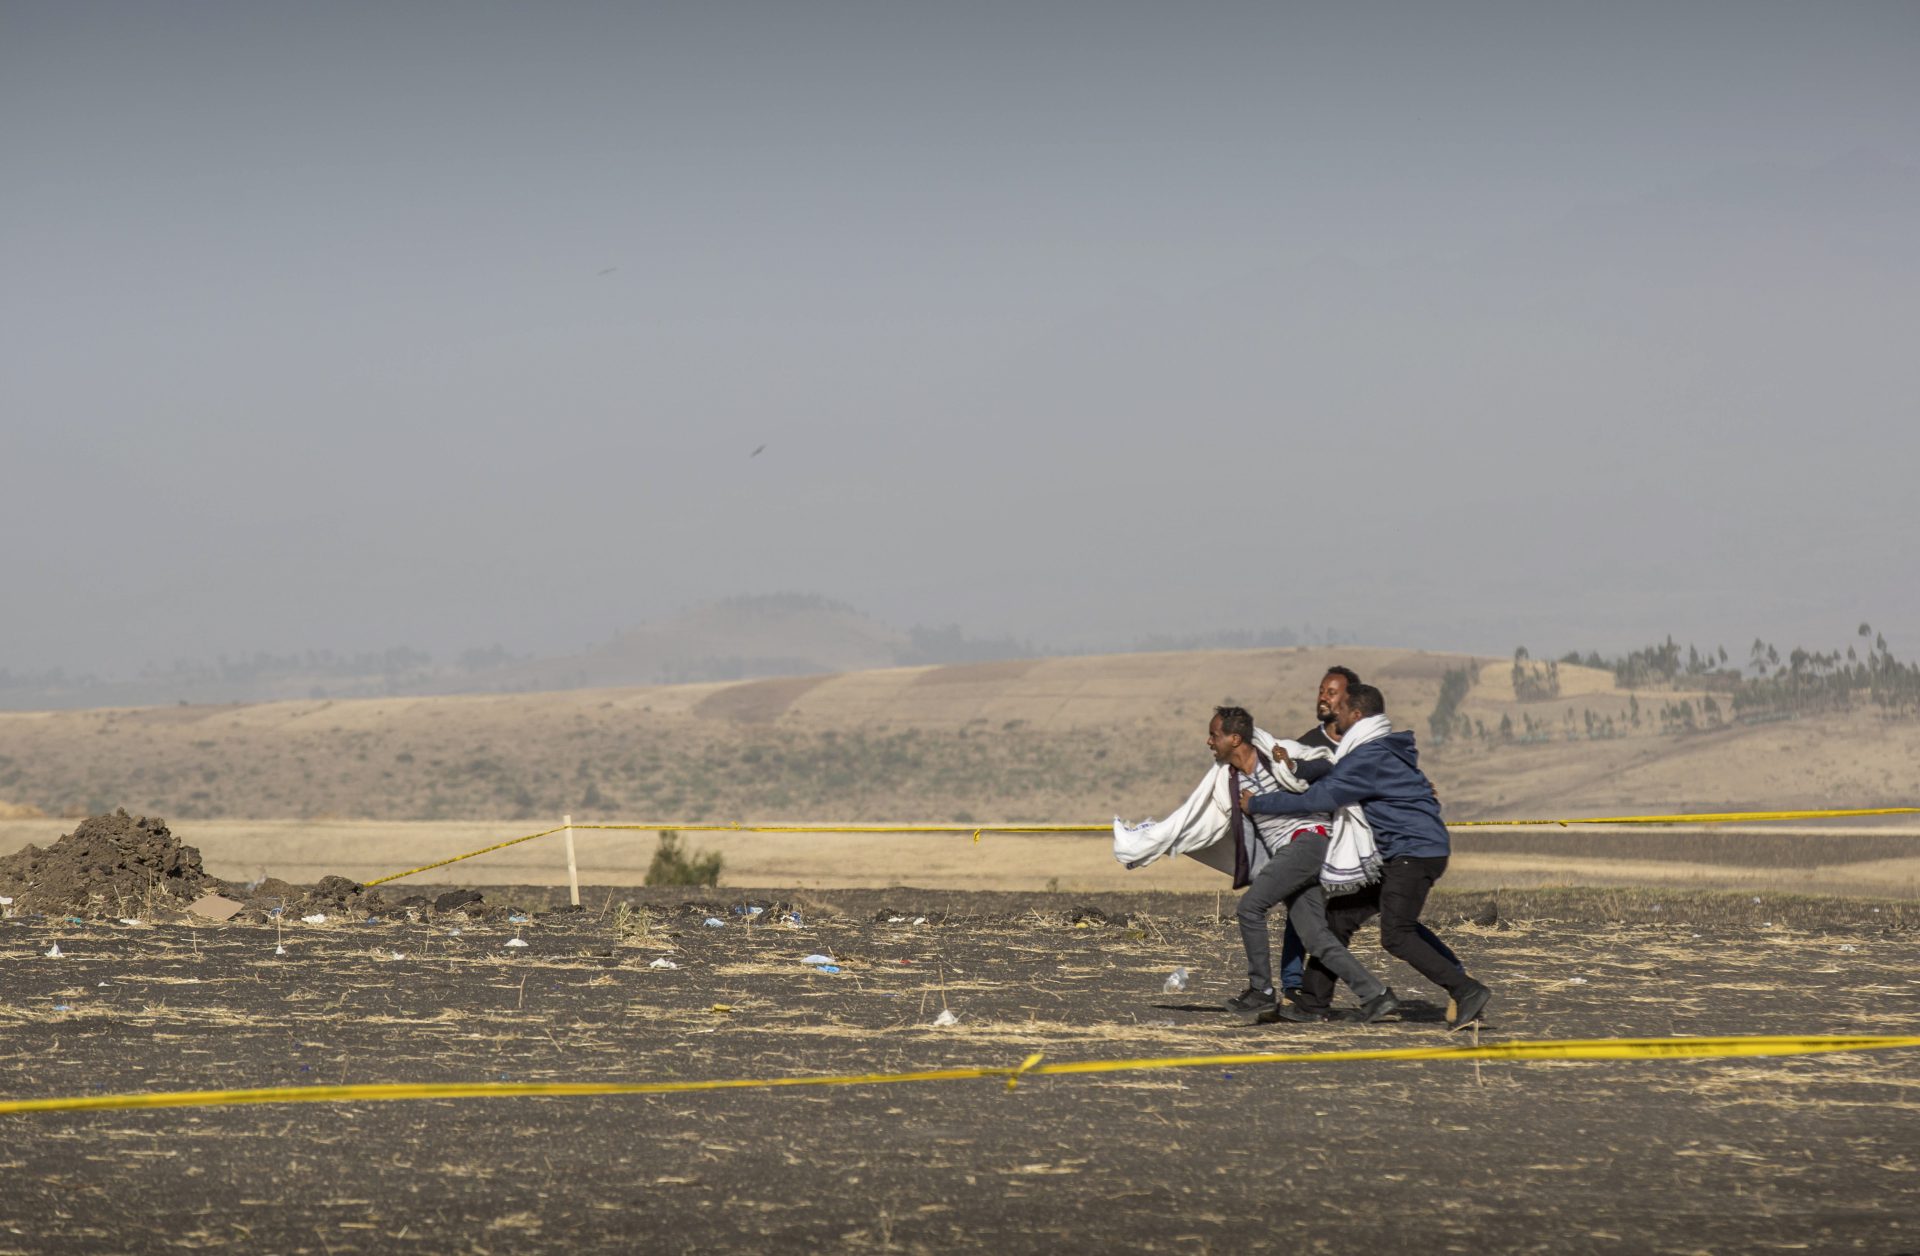 FILE PHOTO: A grieving relative is held back by others at the scene where the Ethiopian Airlines Boeing 737 Max 8 crashed shortly after takeoff, killing all 157 on board, near Bishoftu, or Debre Zeit, south of Addis Ababa, in Ethiopia Wednesday, March 13, 2019. 